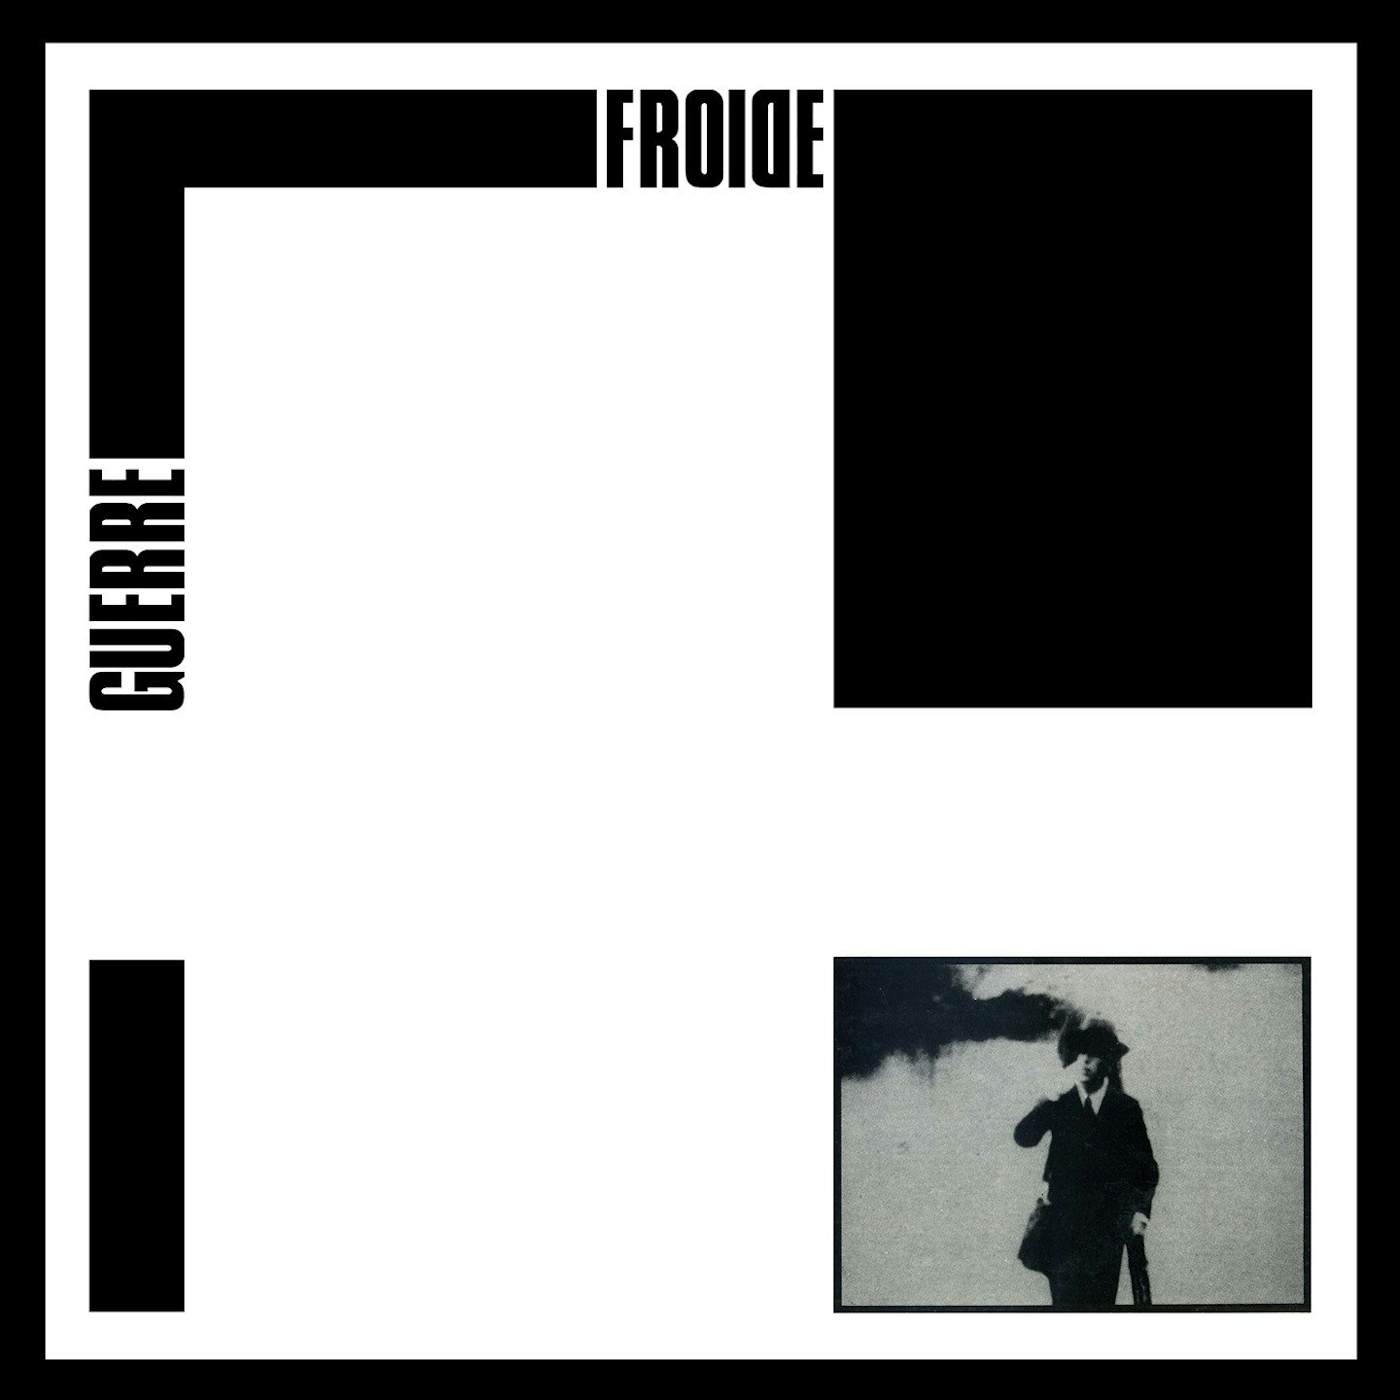 Guerre Froide 'Guerre Froide' Vinyl Record